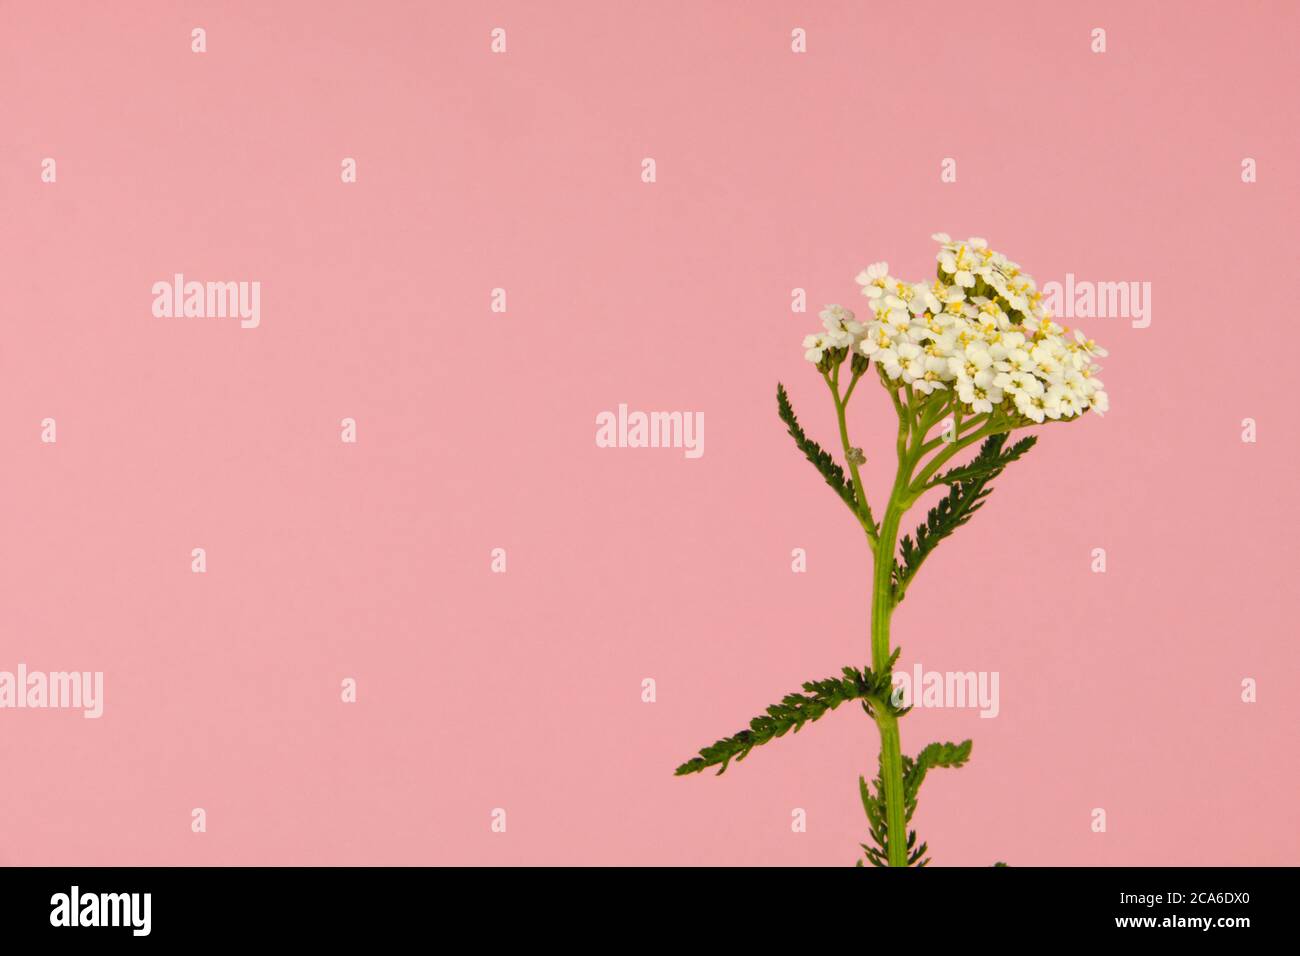 Close-up of a wild flower known as common yarrow on a pink background, scientific name Achillea millefolium Stock Photo